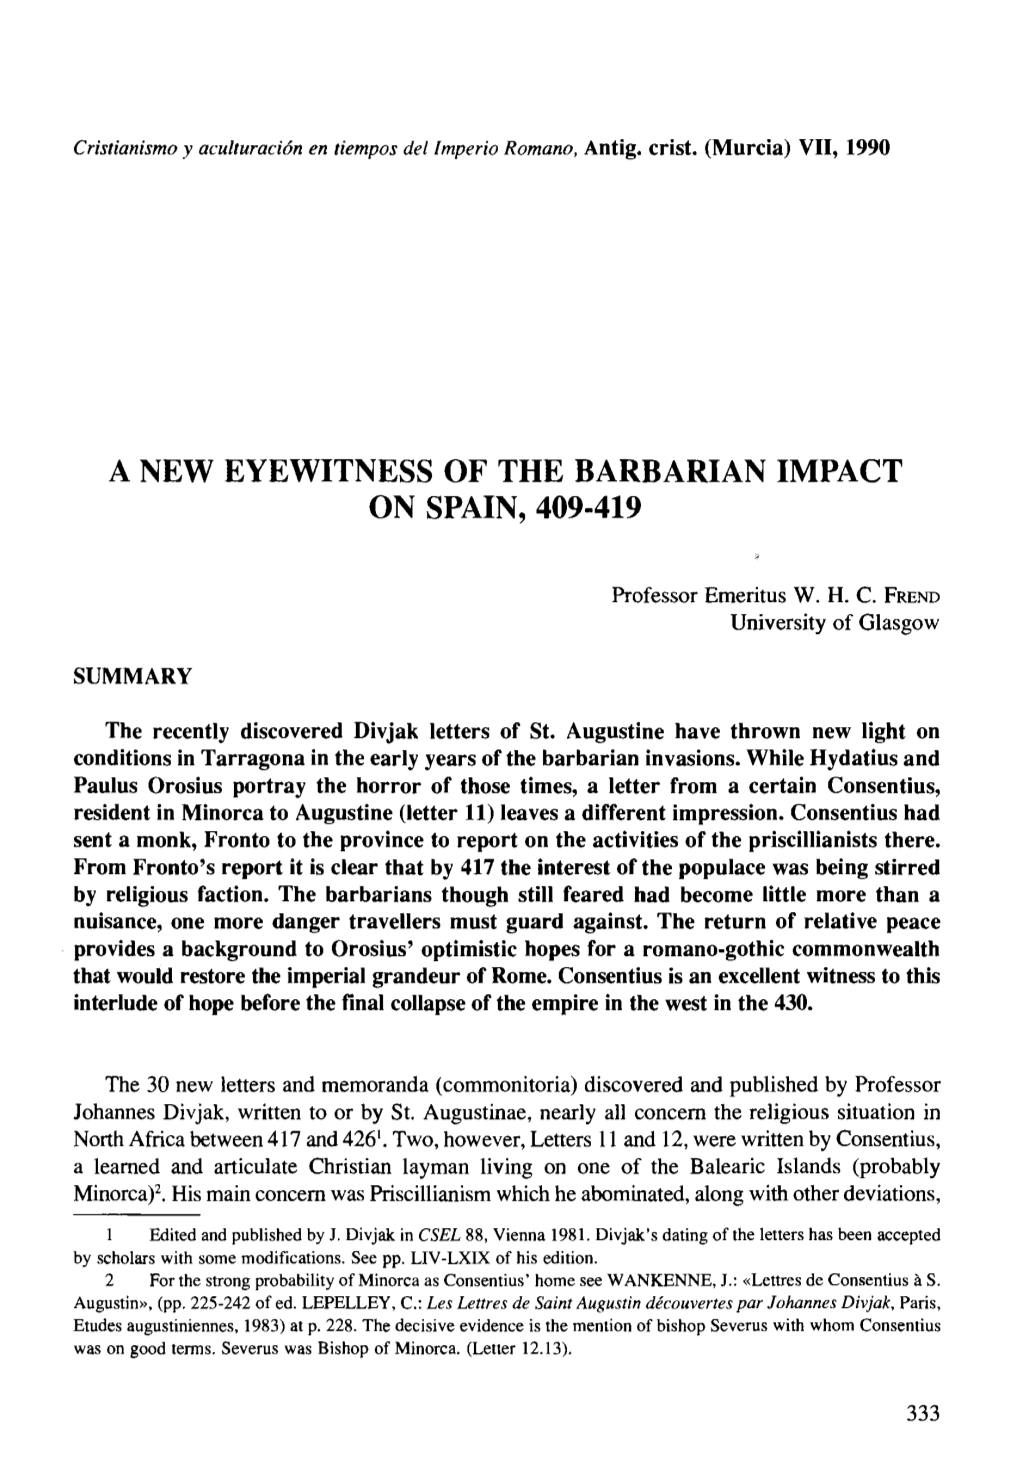 A New Eyewitness of the Barbarian Impact on Spain, 409-419